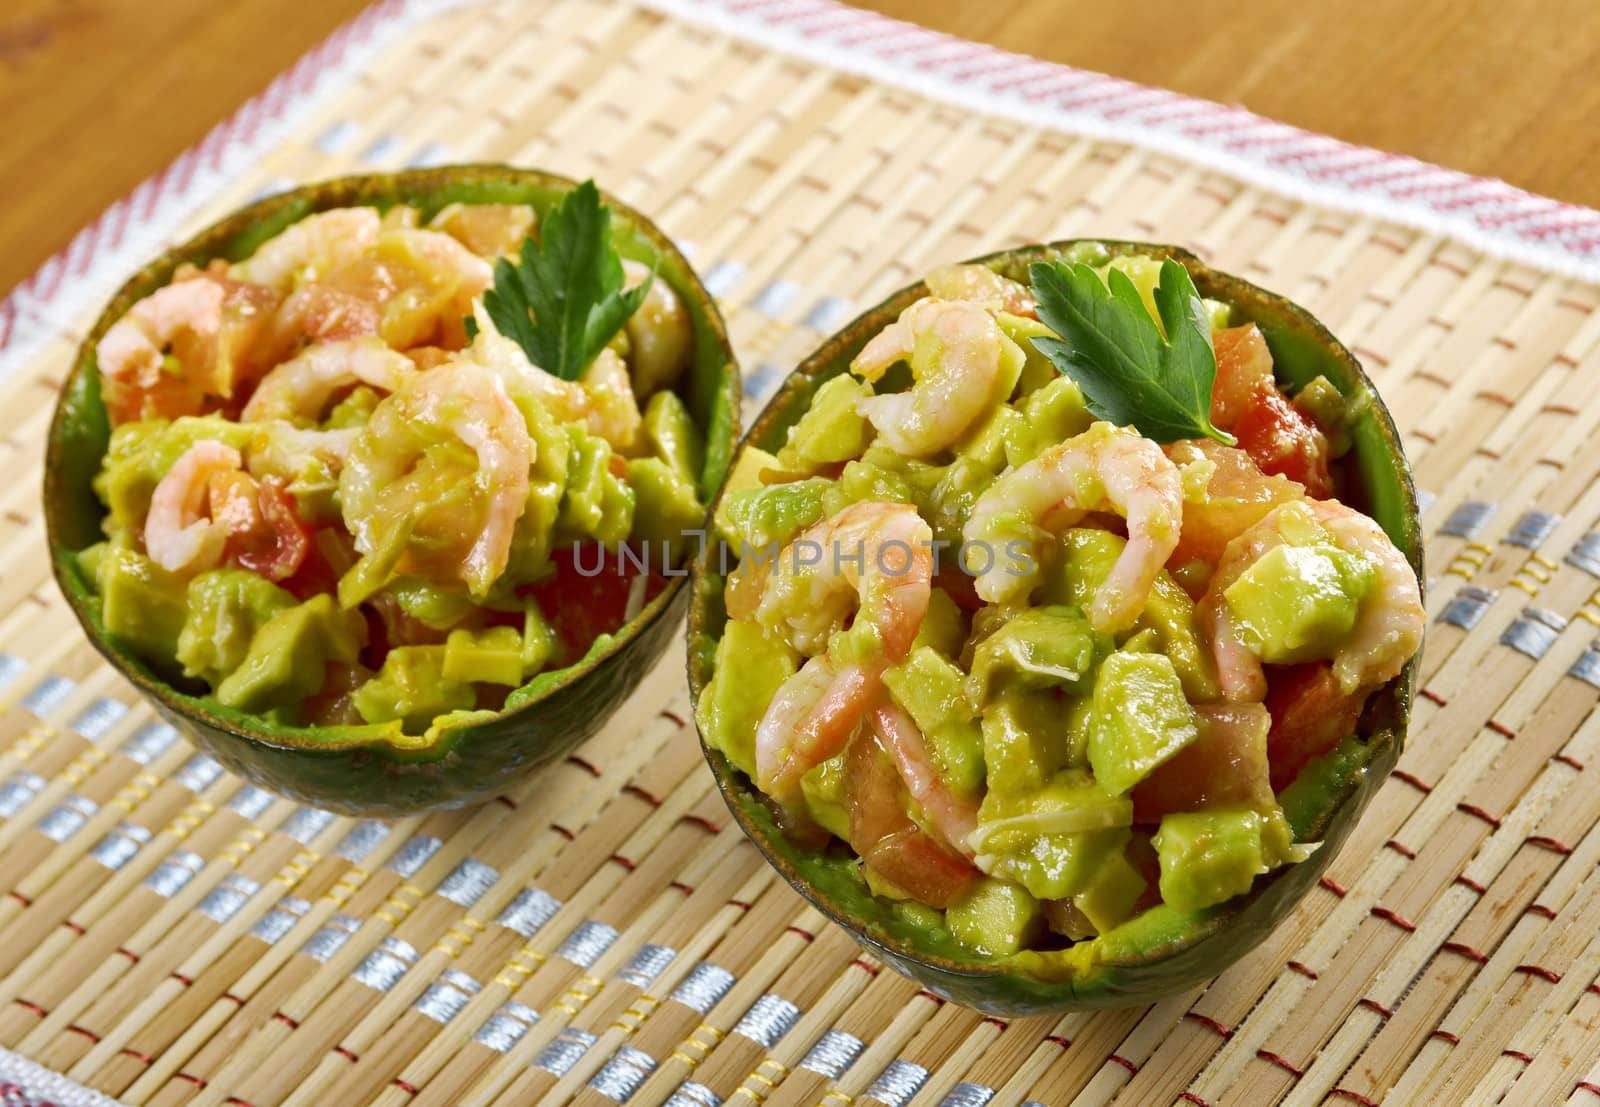 Avocado and Shrimps Salad by Fanfo